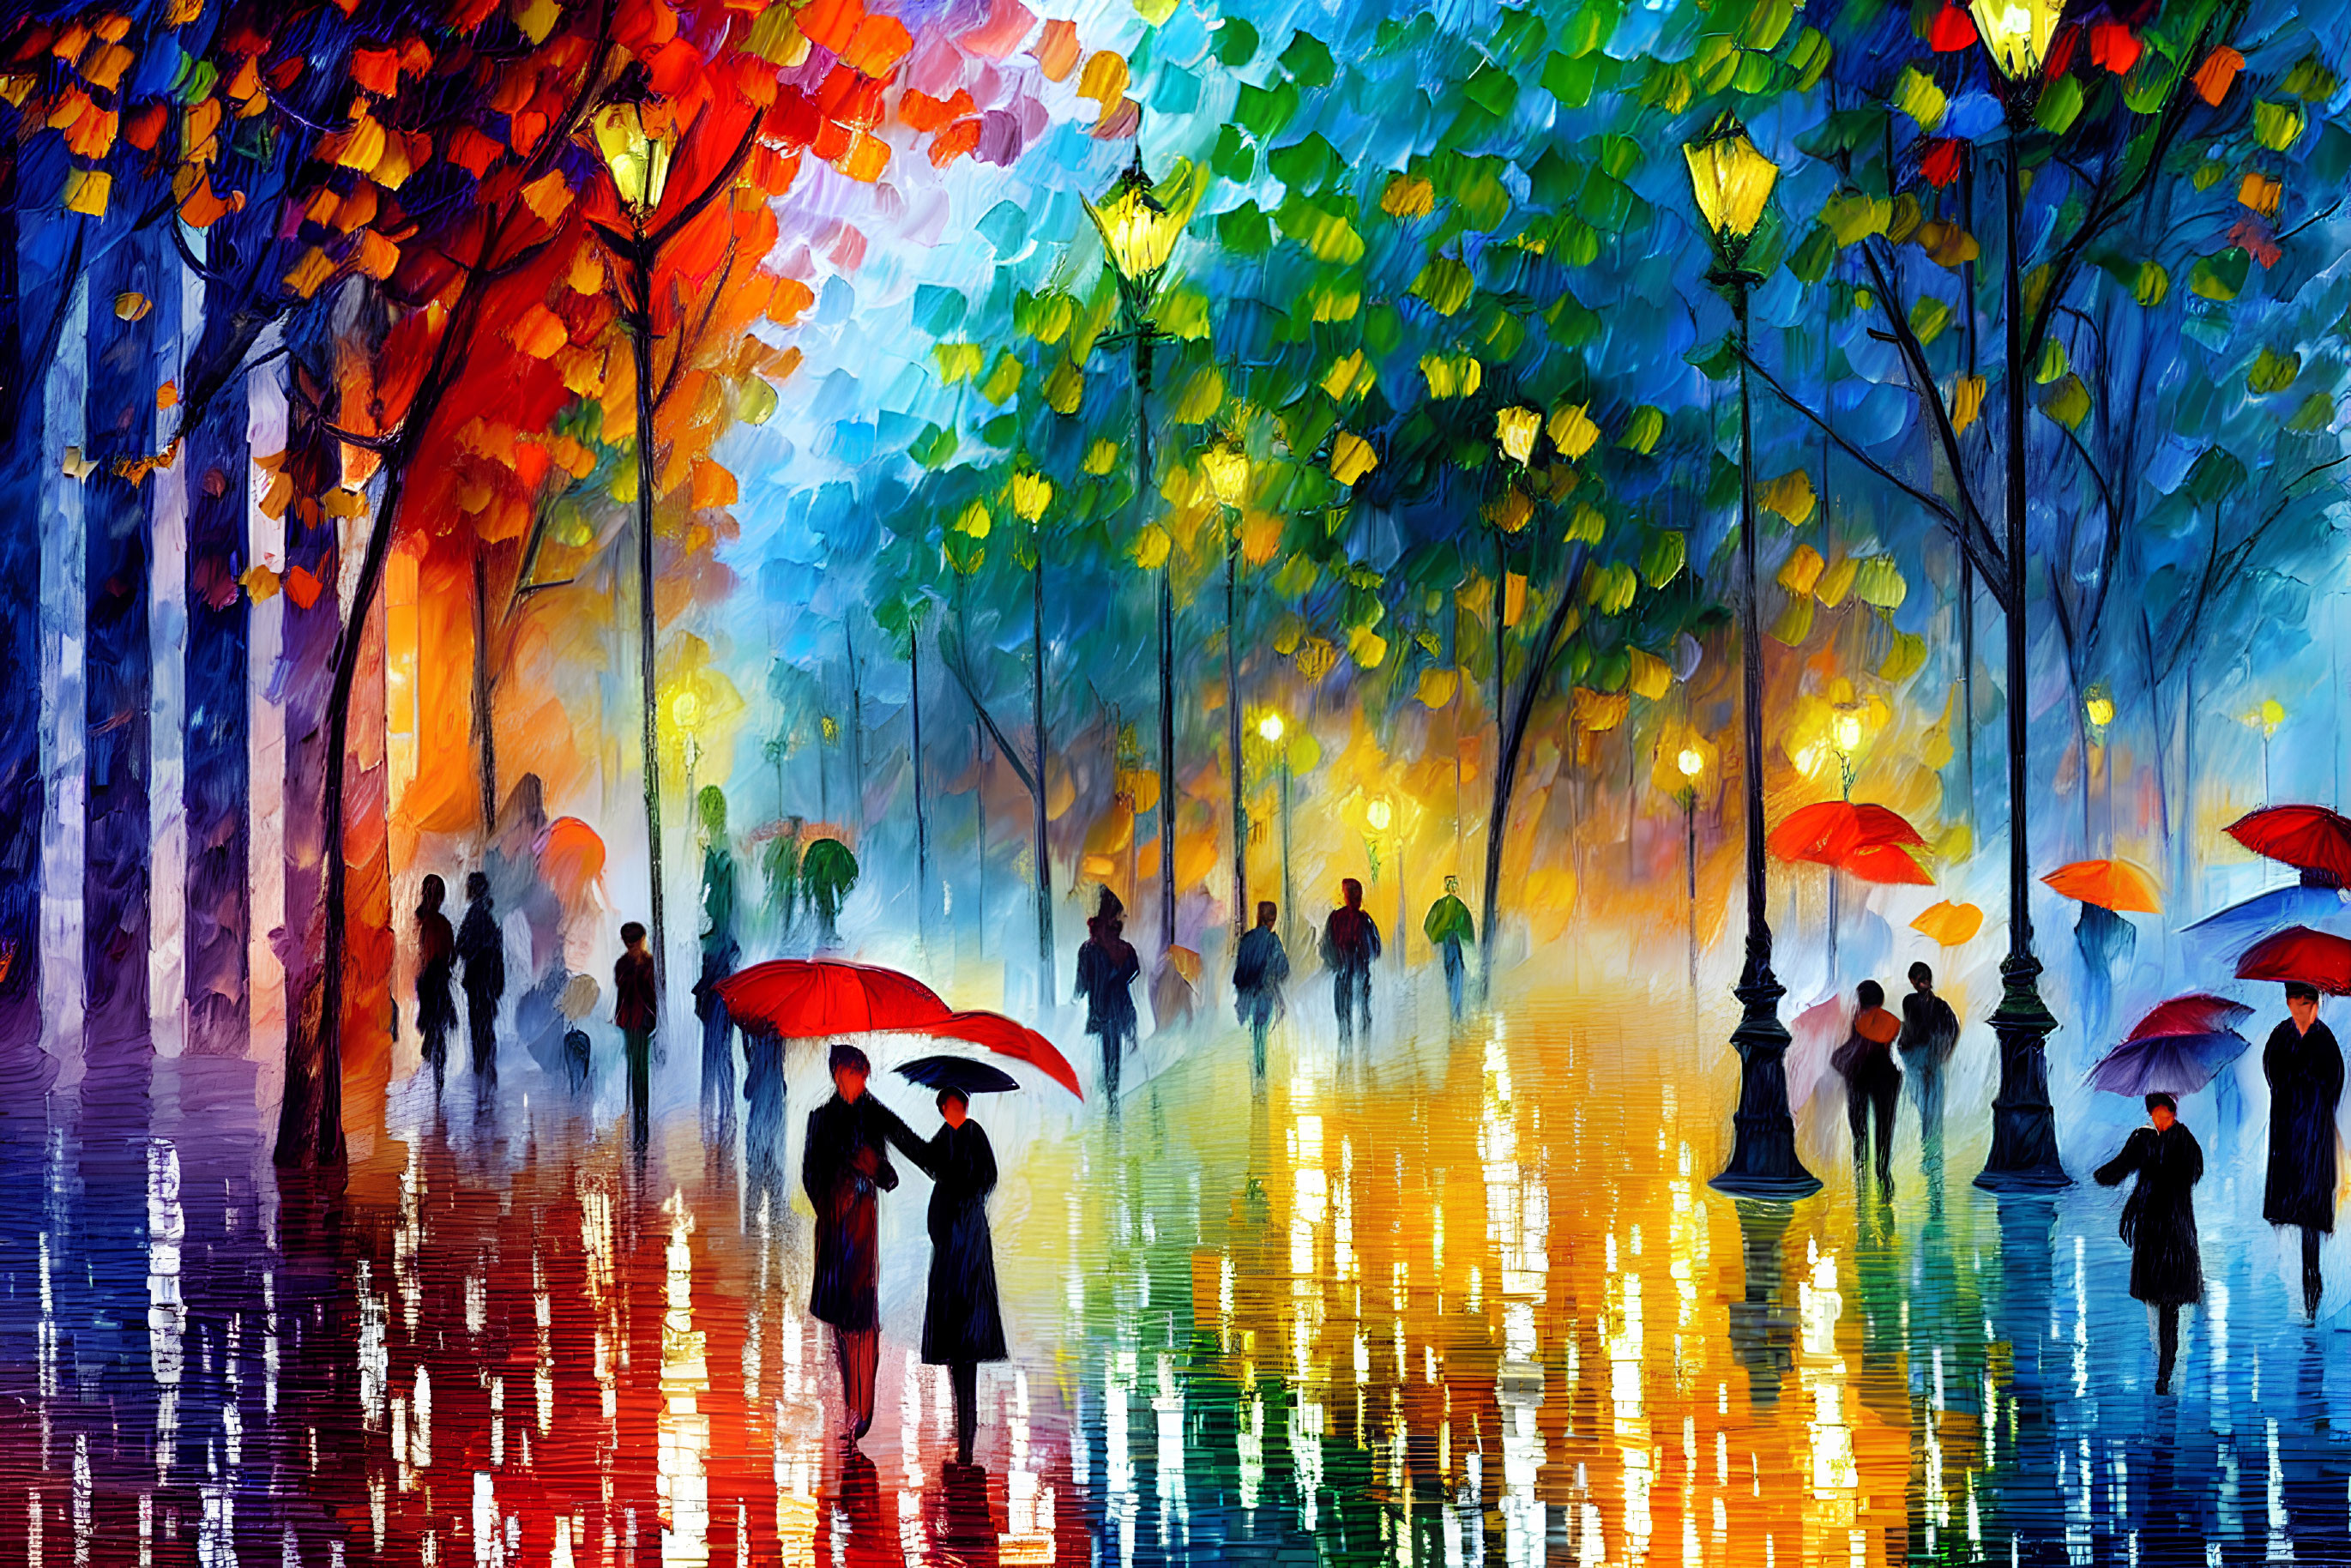 Colorful Impressionistic Painting of People with Umbrellas on Rainy Street